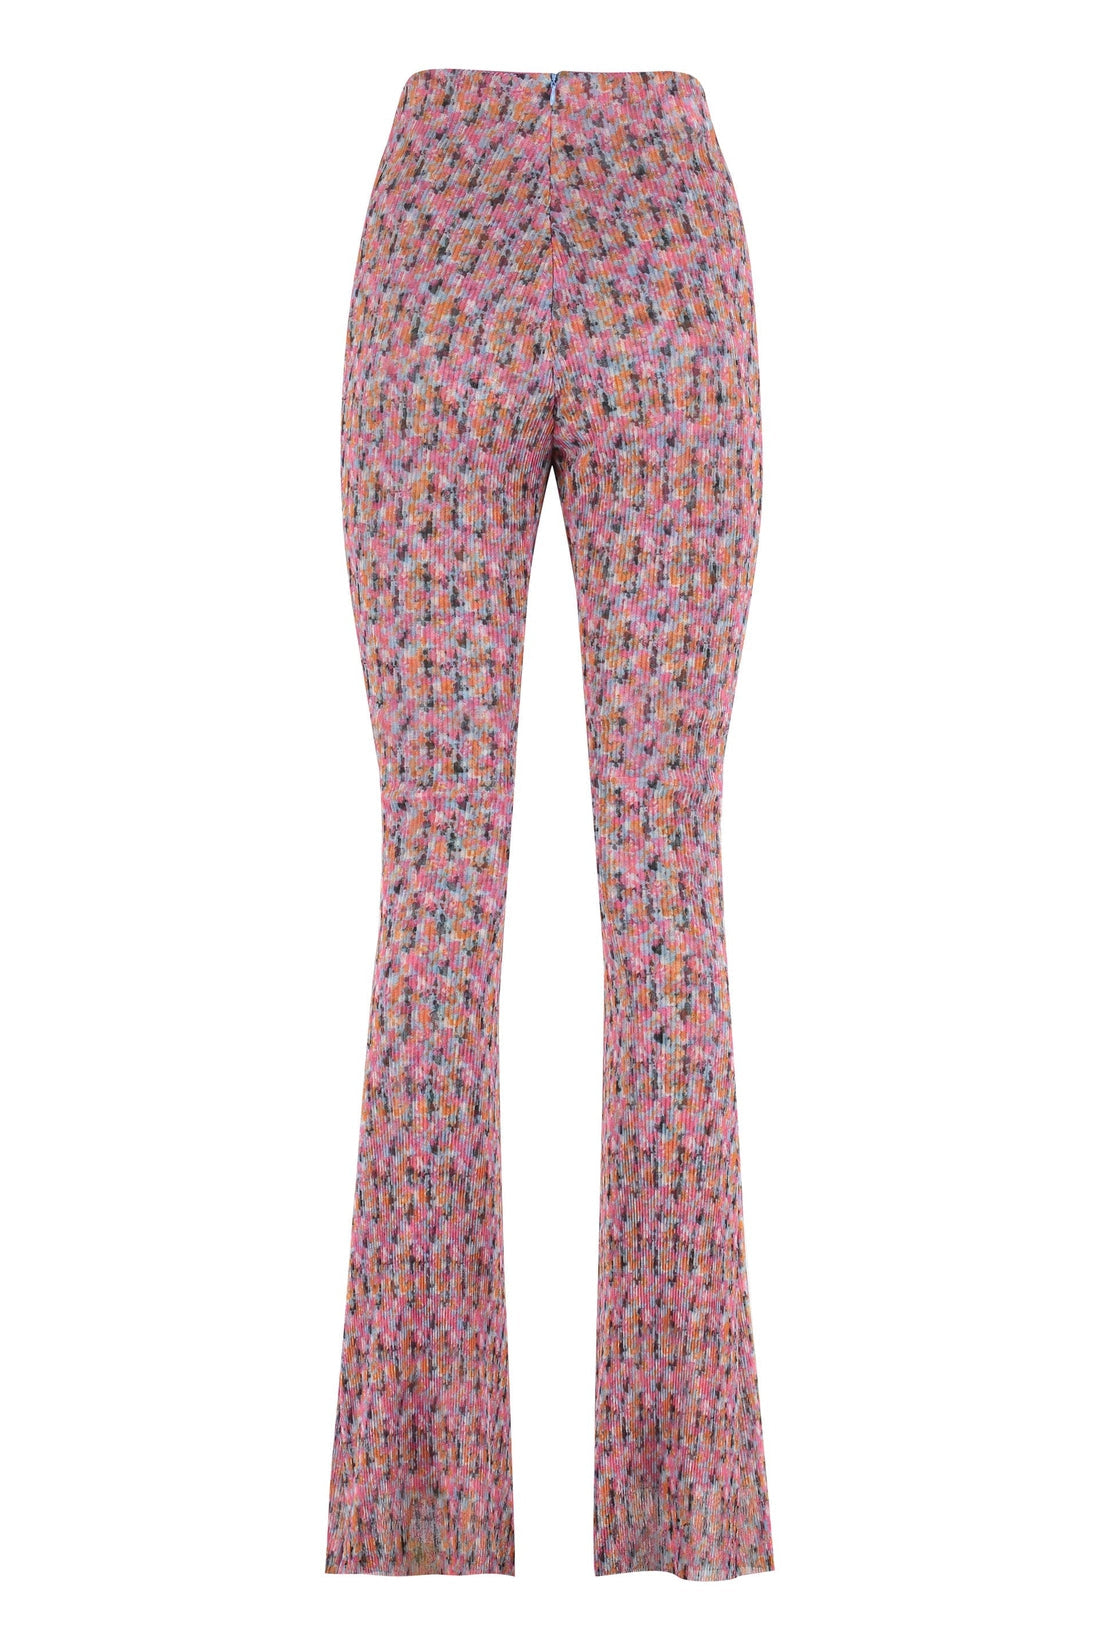 Philosophy di Lorenzo Serafini-OUTLET-SALE-Printed high-rise trousers-ARCHIVIST